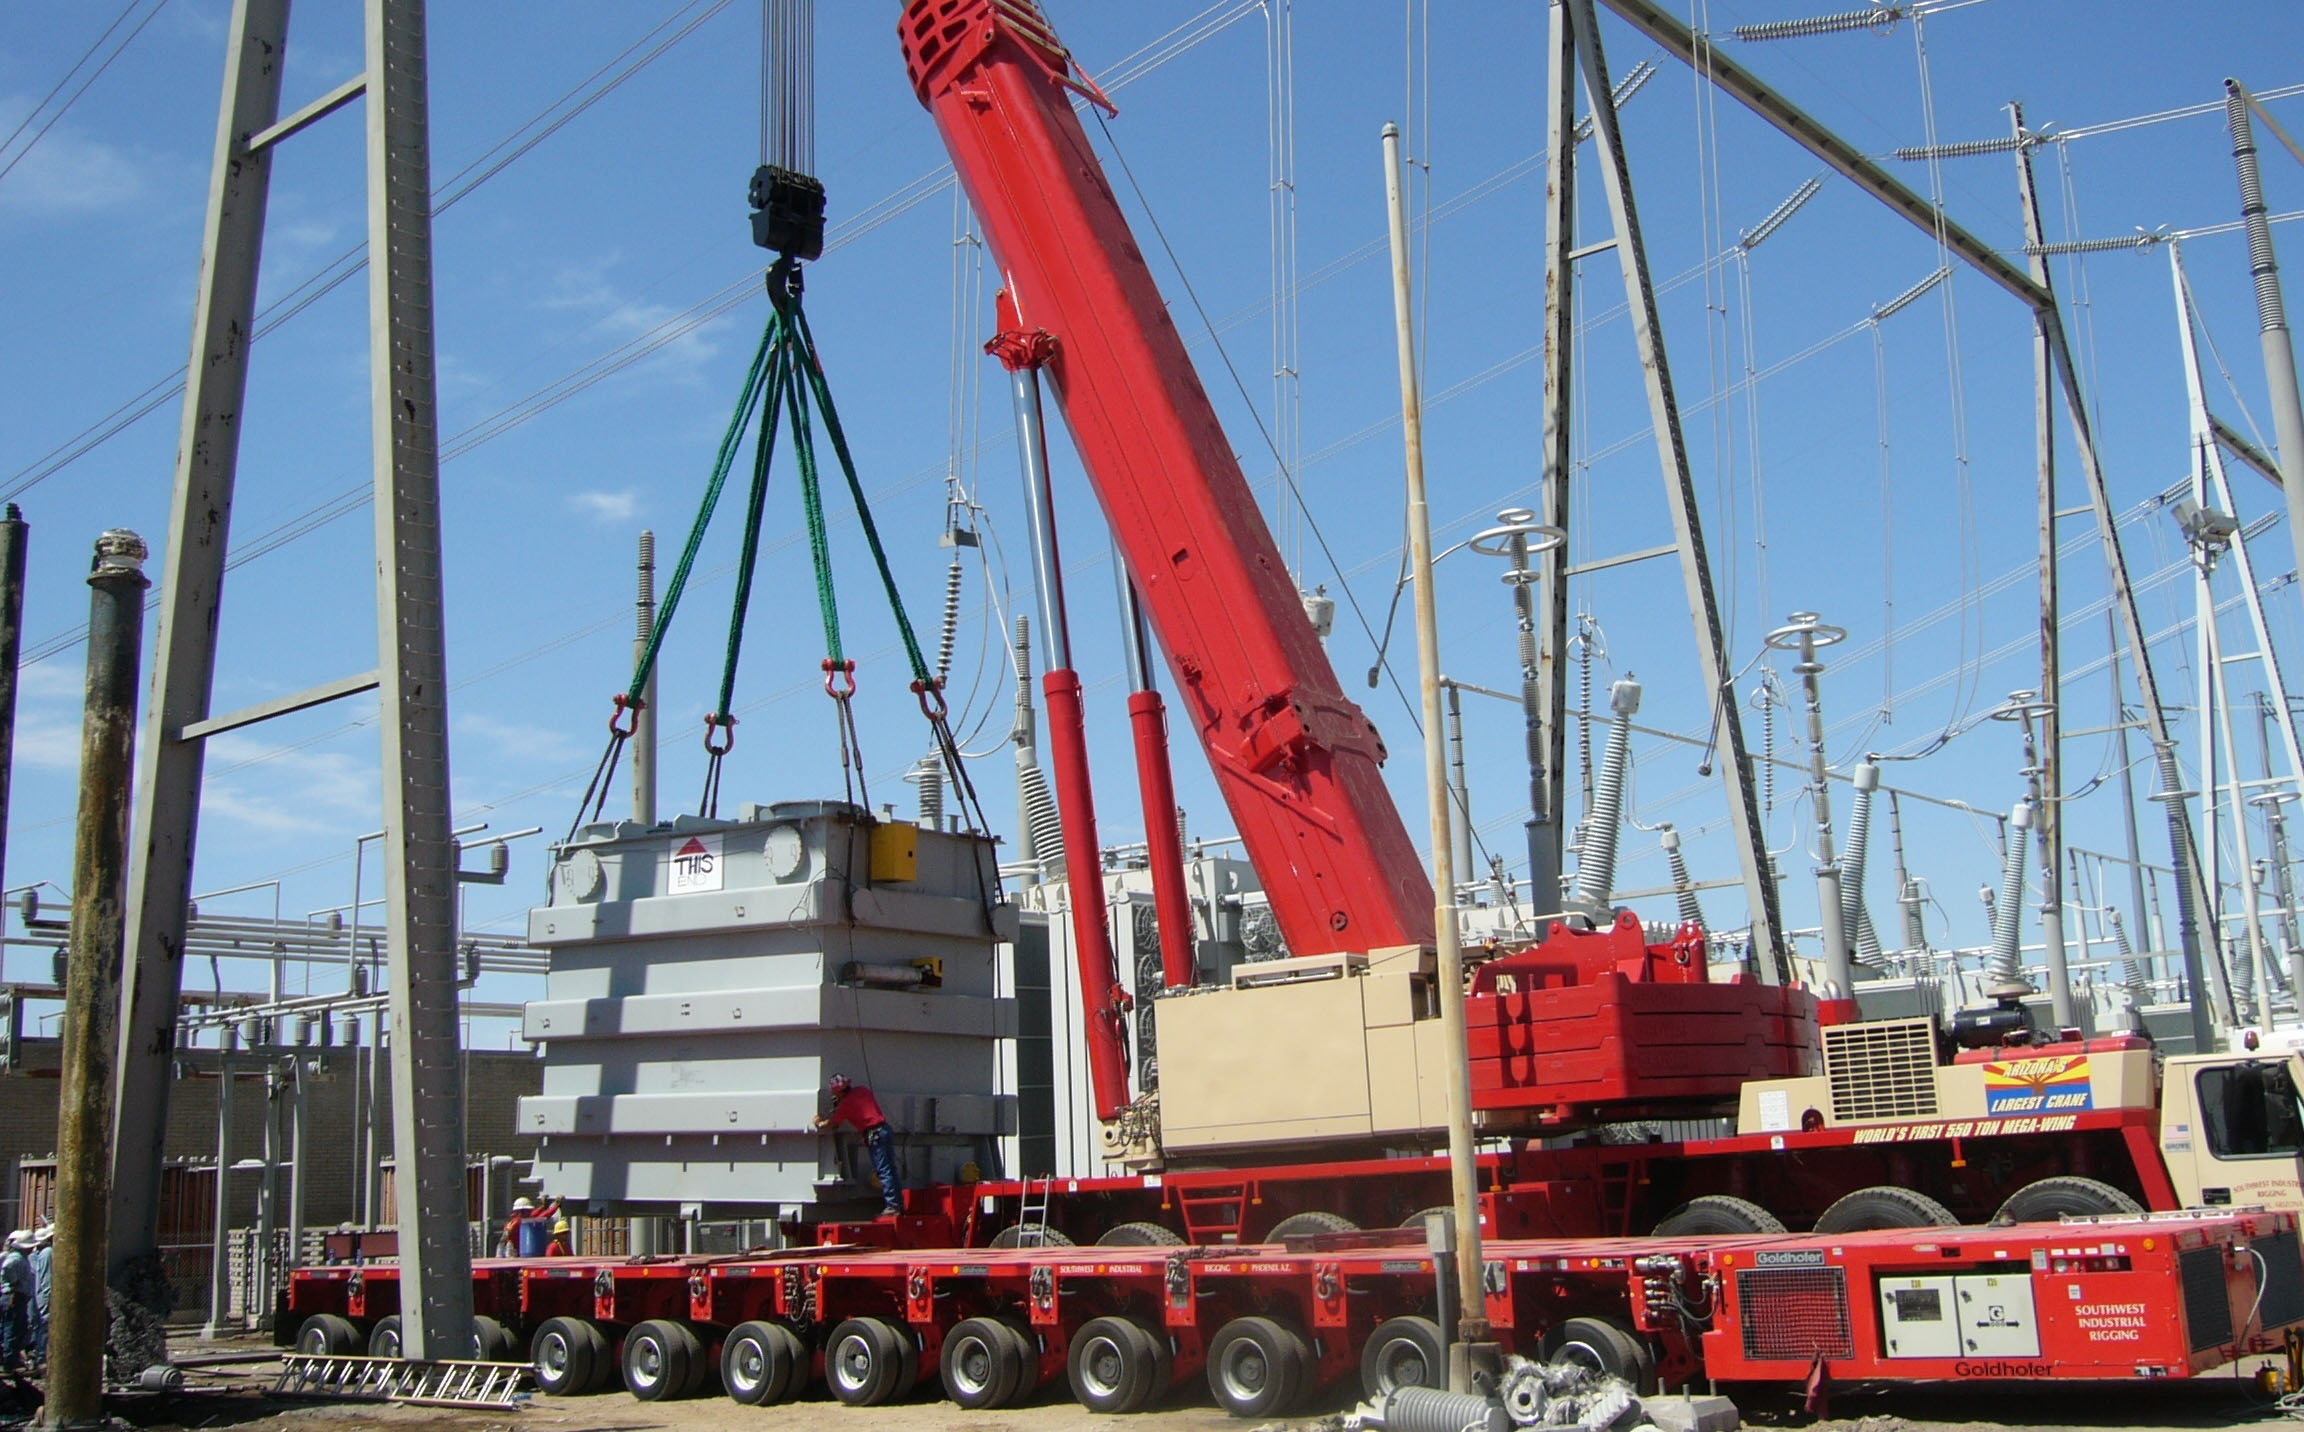 Who Is Responsible For Mobile Crane Lifts in Construction?